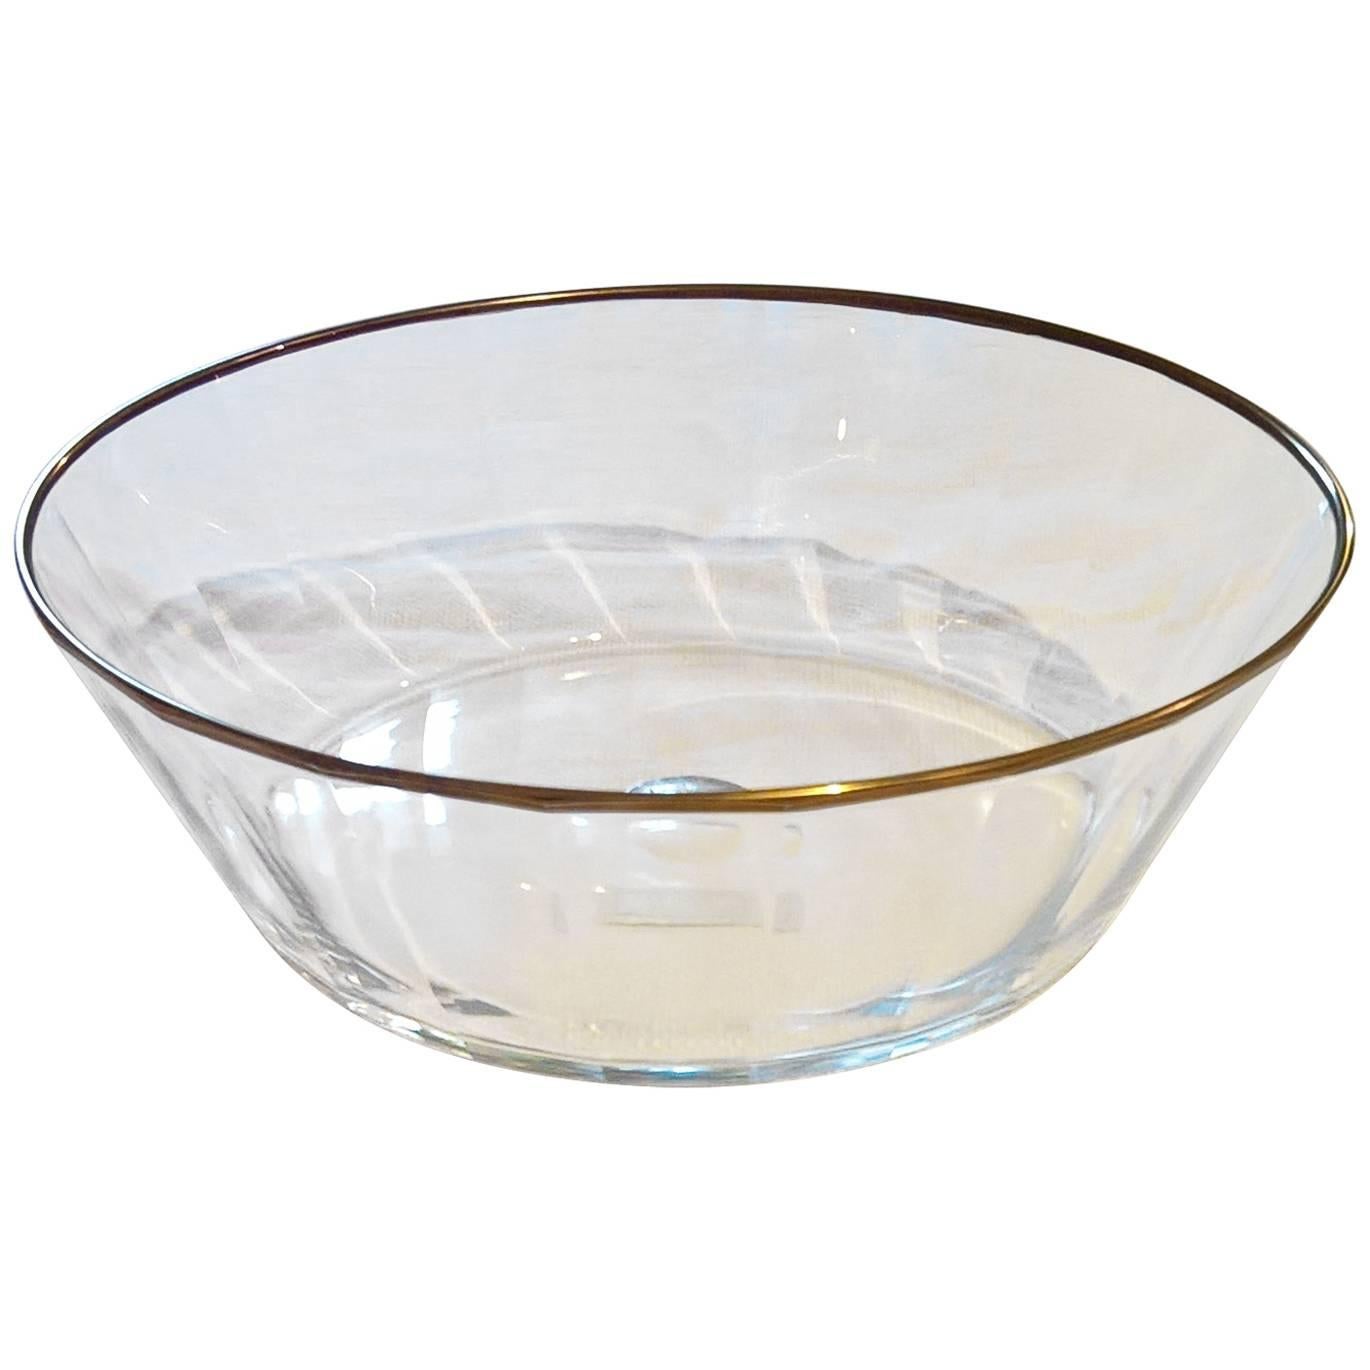  S.A.L.I.R. Murano Glass Bowl with Gold Accent